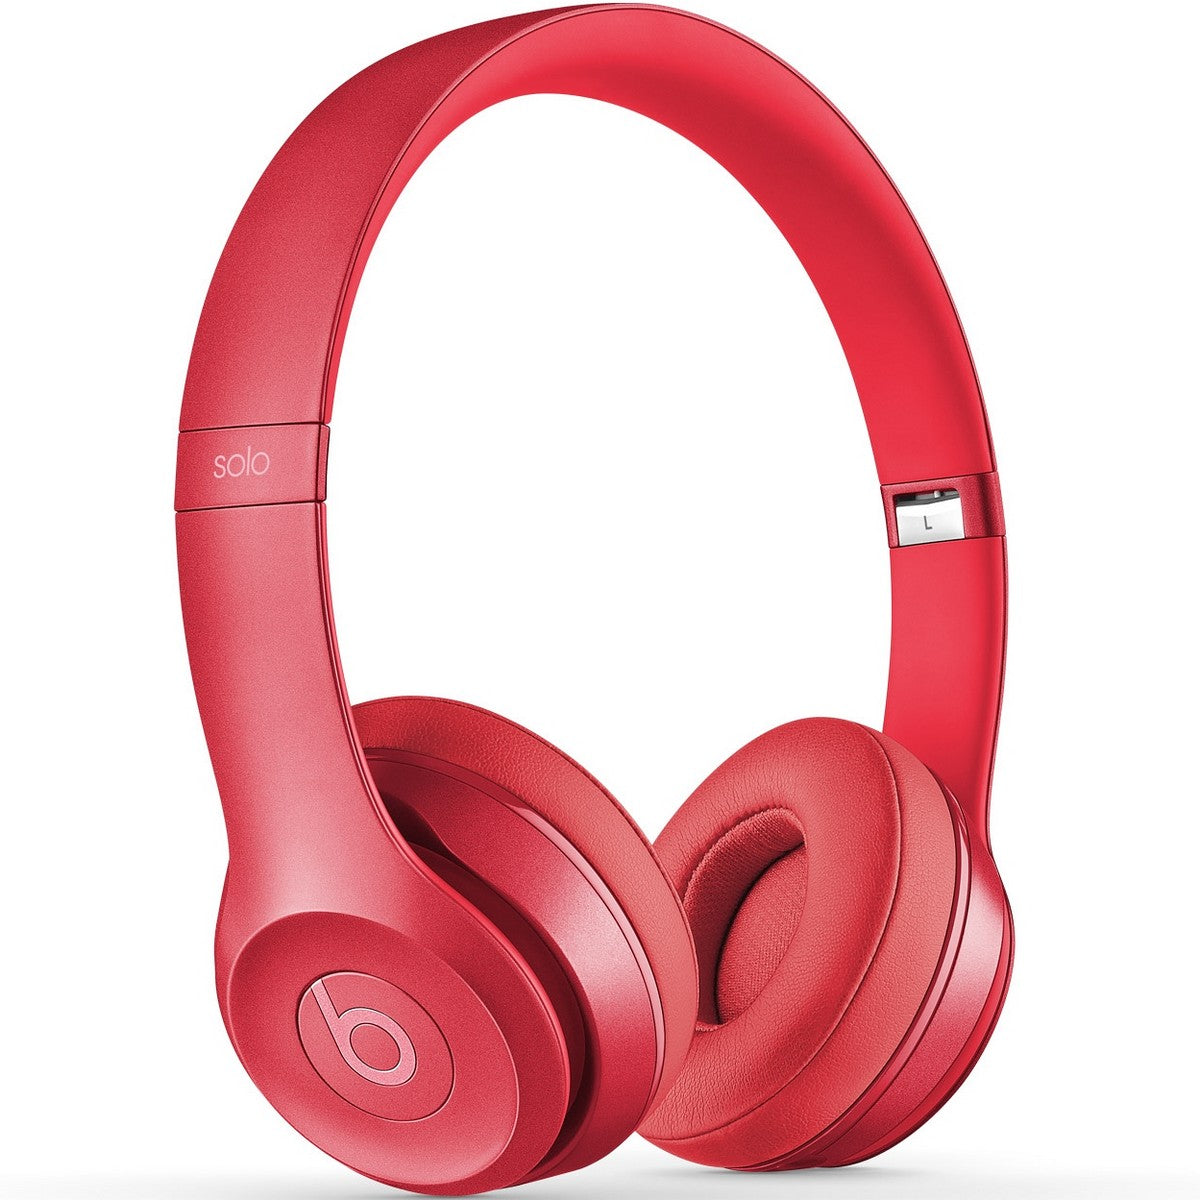 Beats by Dr. Dre Solo 2 Royal Collection 23387 | On Ear Headphone Blush Rose MHNV2AM/A